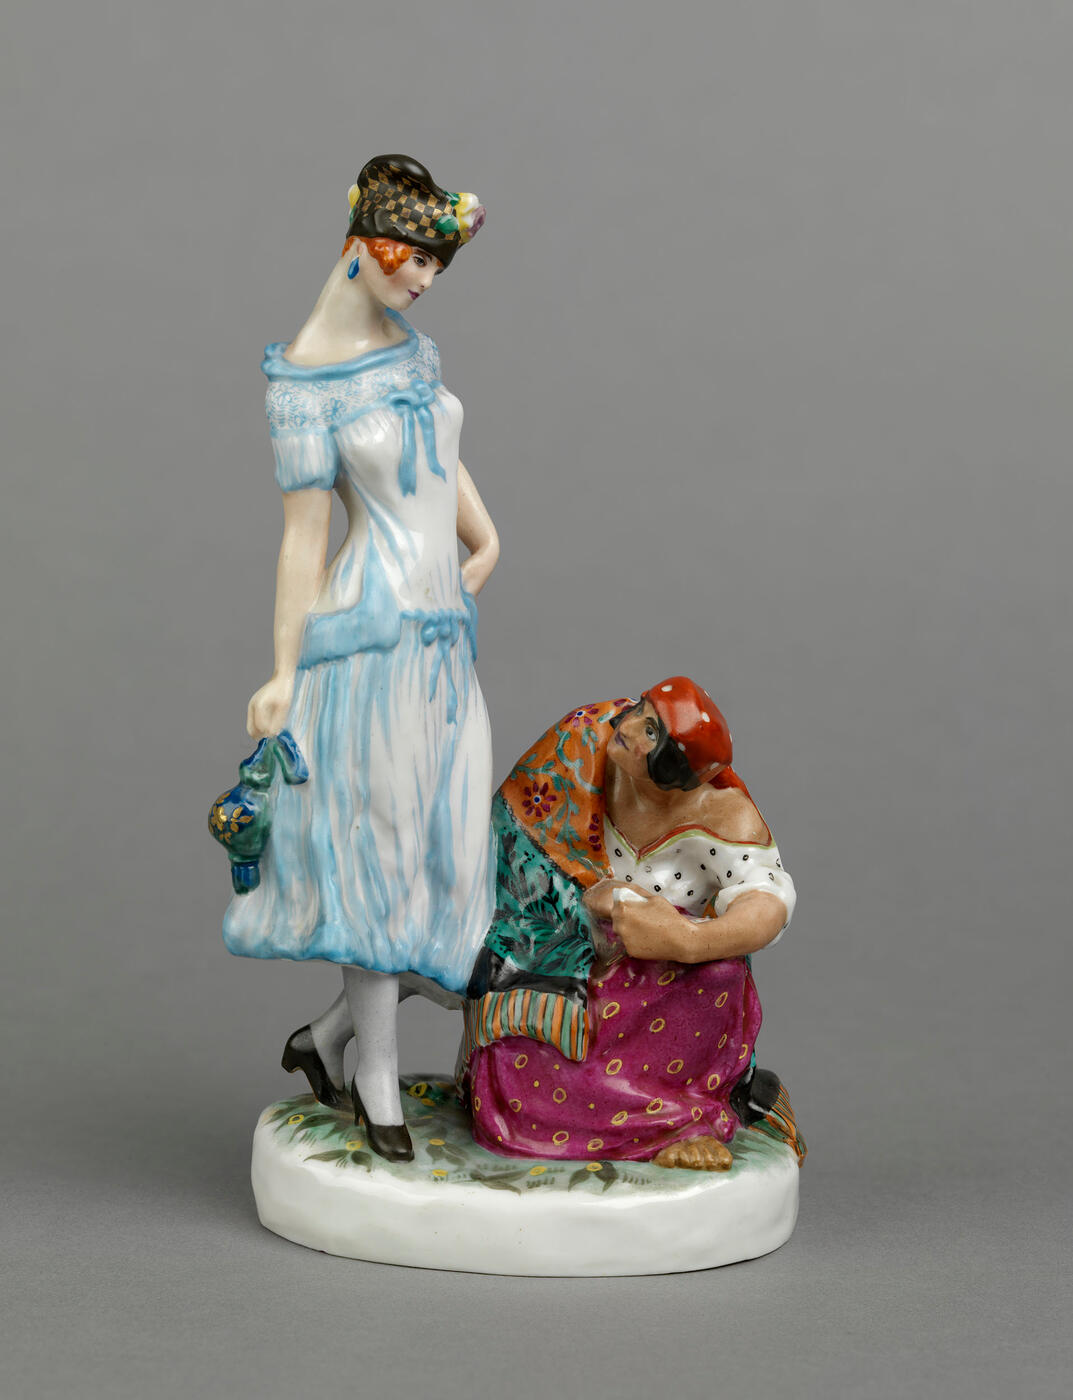 AFTER A 1922 MODEL BY NATALIA DANKO,
STATE PORCELAIN MANUFACTORY